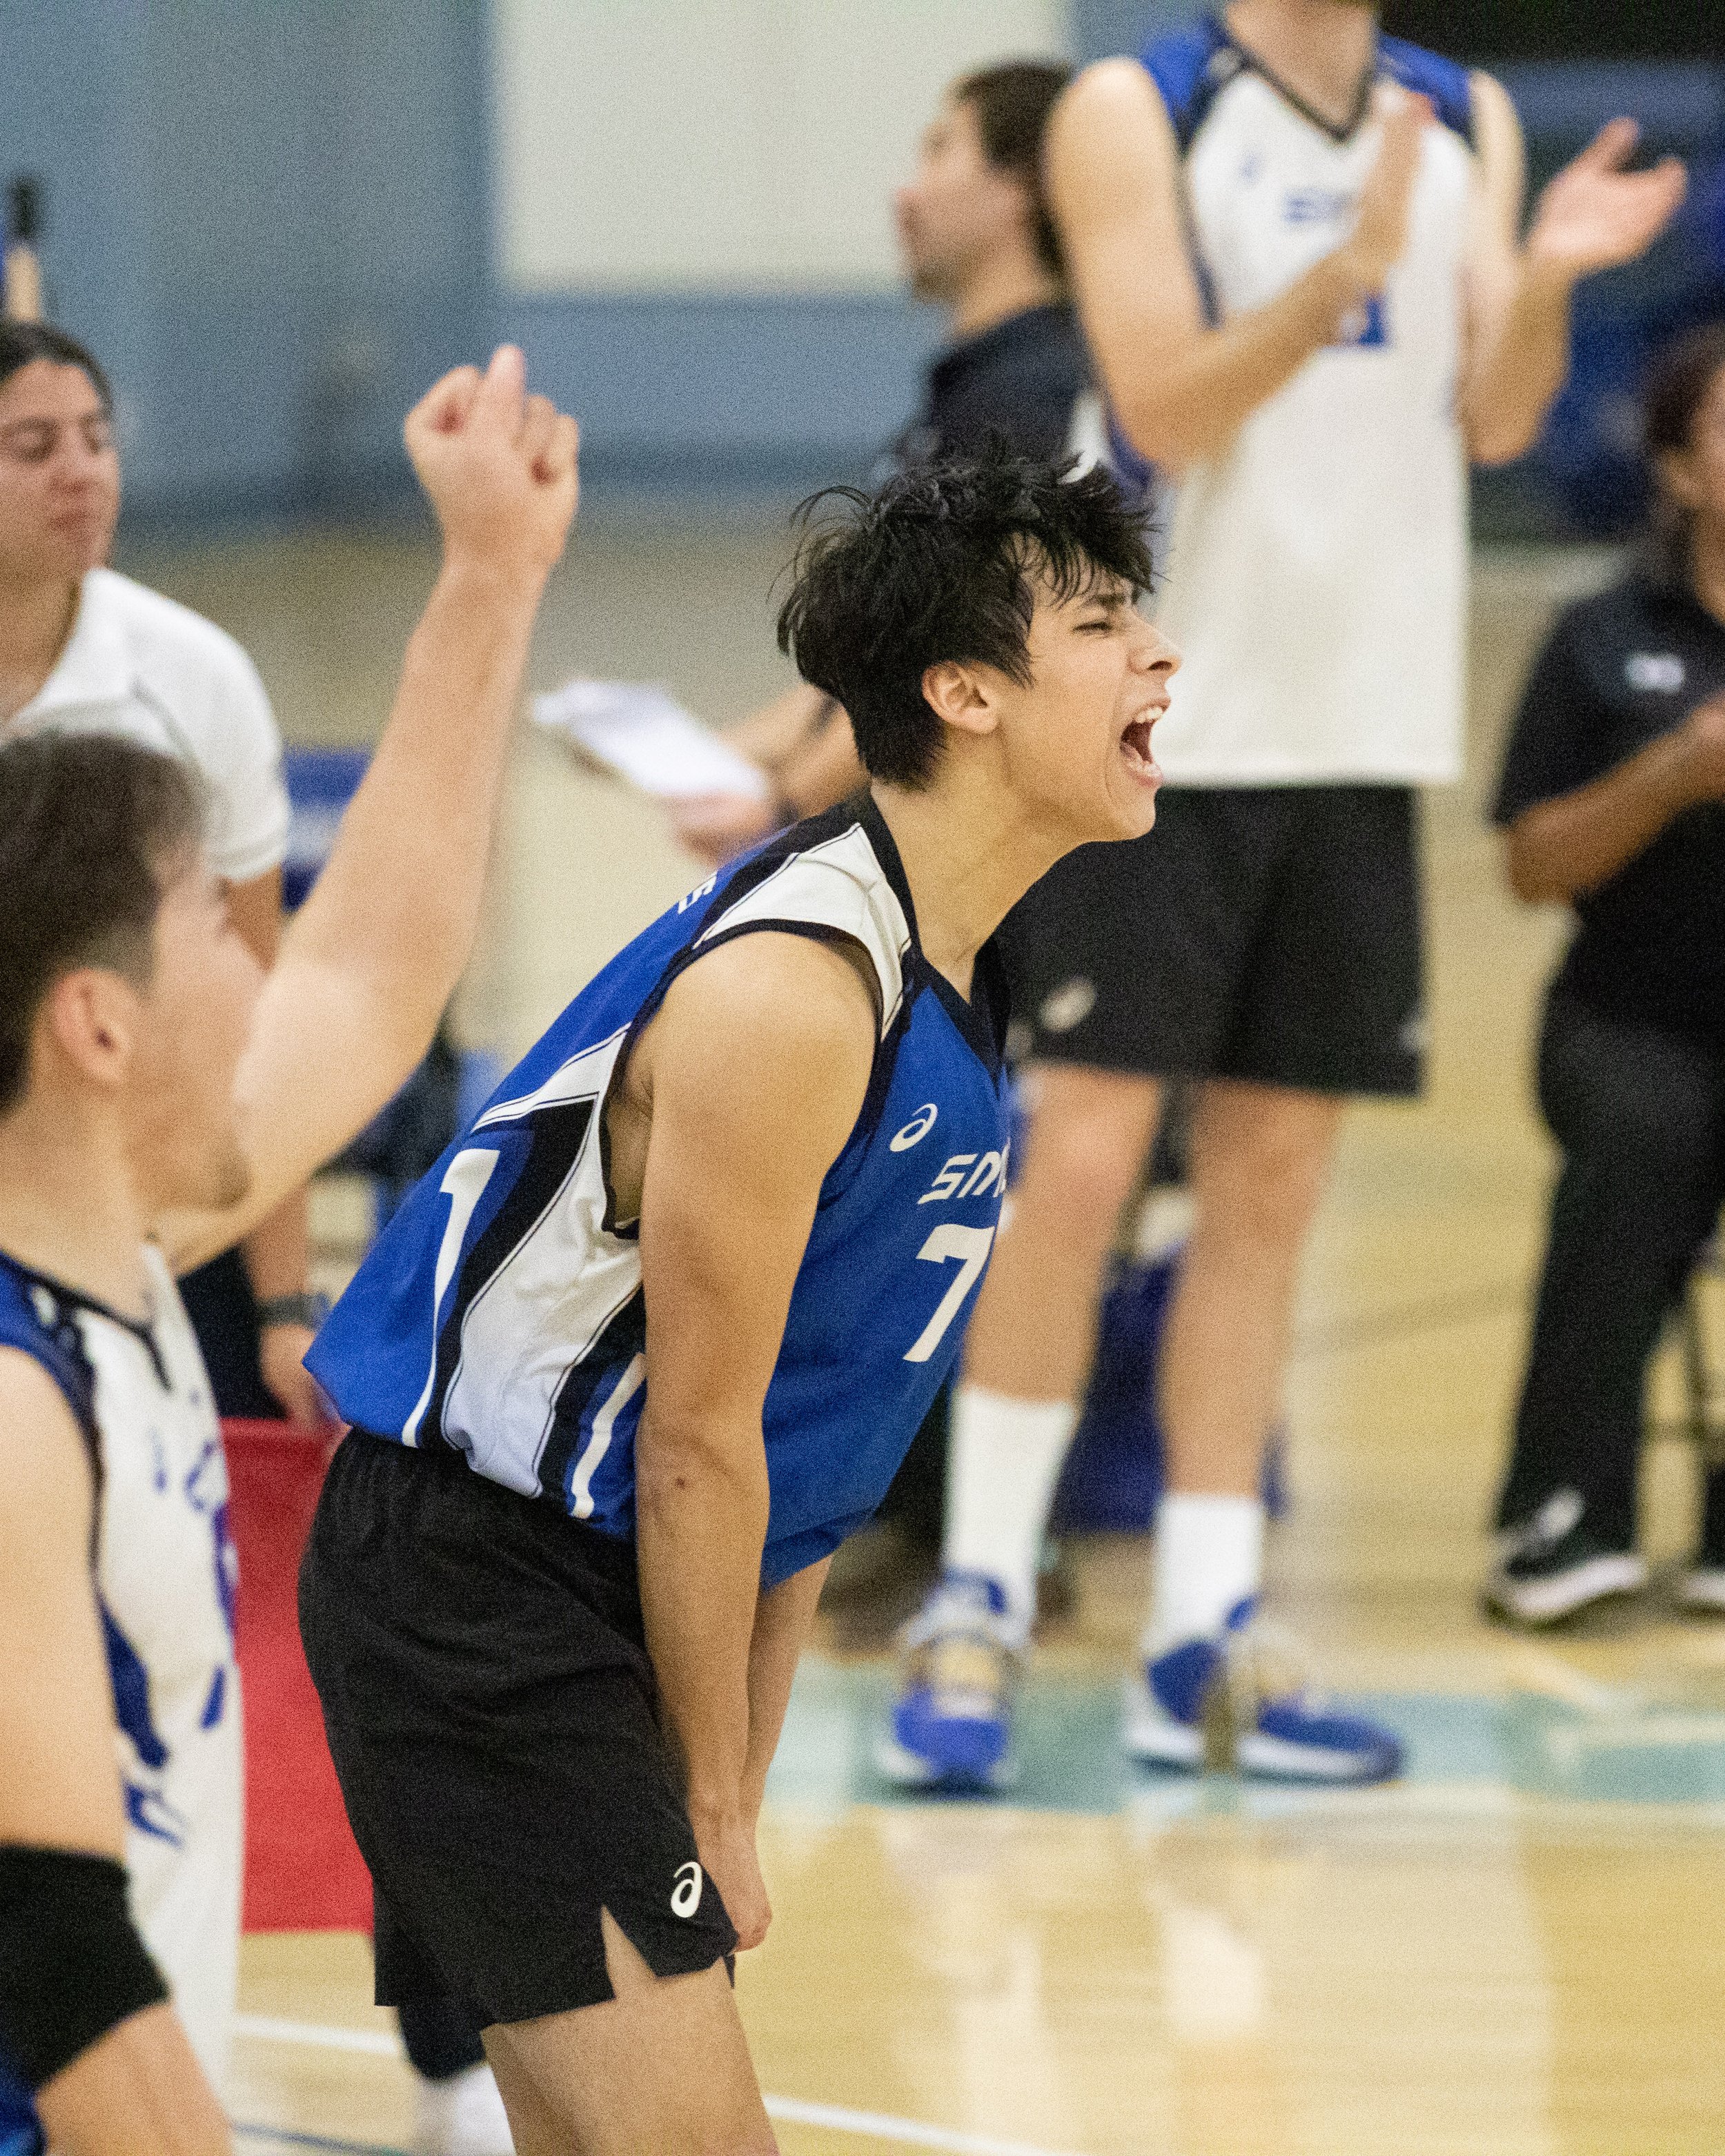  Santa Monica College Corsair libero Javier Castillo (7) cheering after the Corsairs scored during the third set of a home game against Long Beach City College Vikings in Santa Monica, Calif., on Friday, March 3, 2023. The game resulted in the Corsai